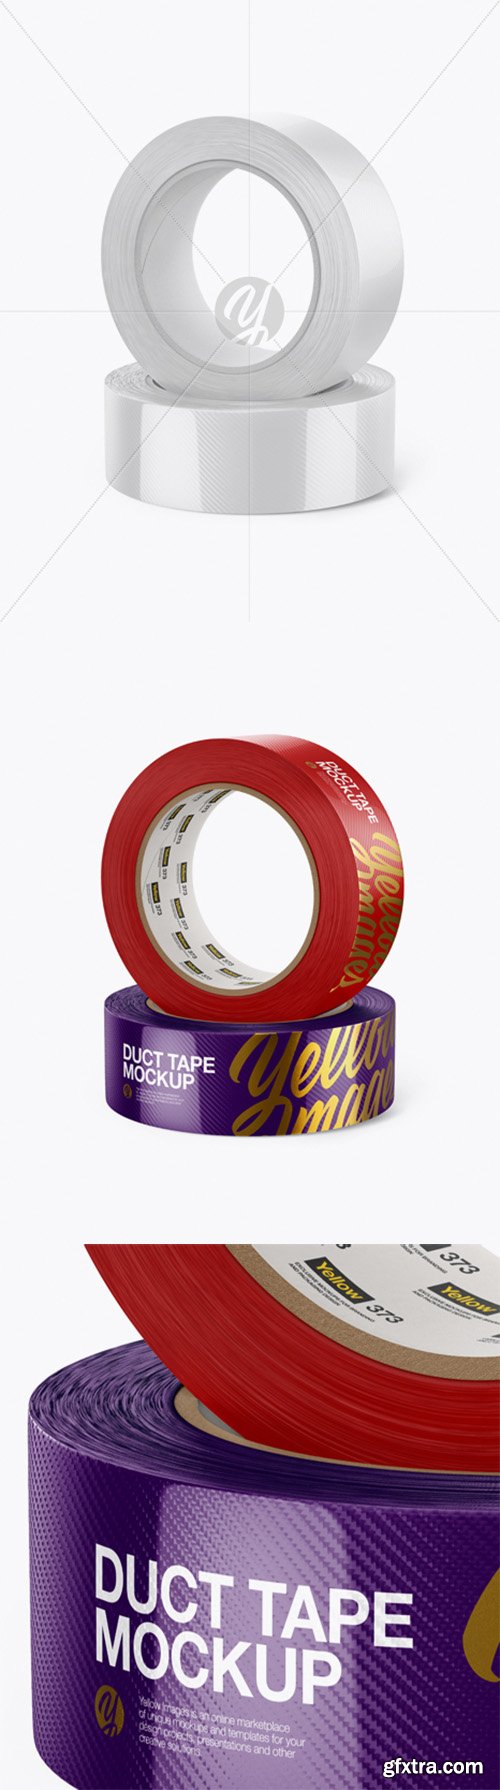 Two Textured Duct Tape Rolls Mockup - Front View 25478